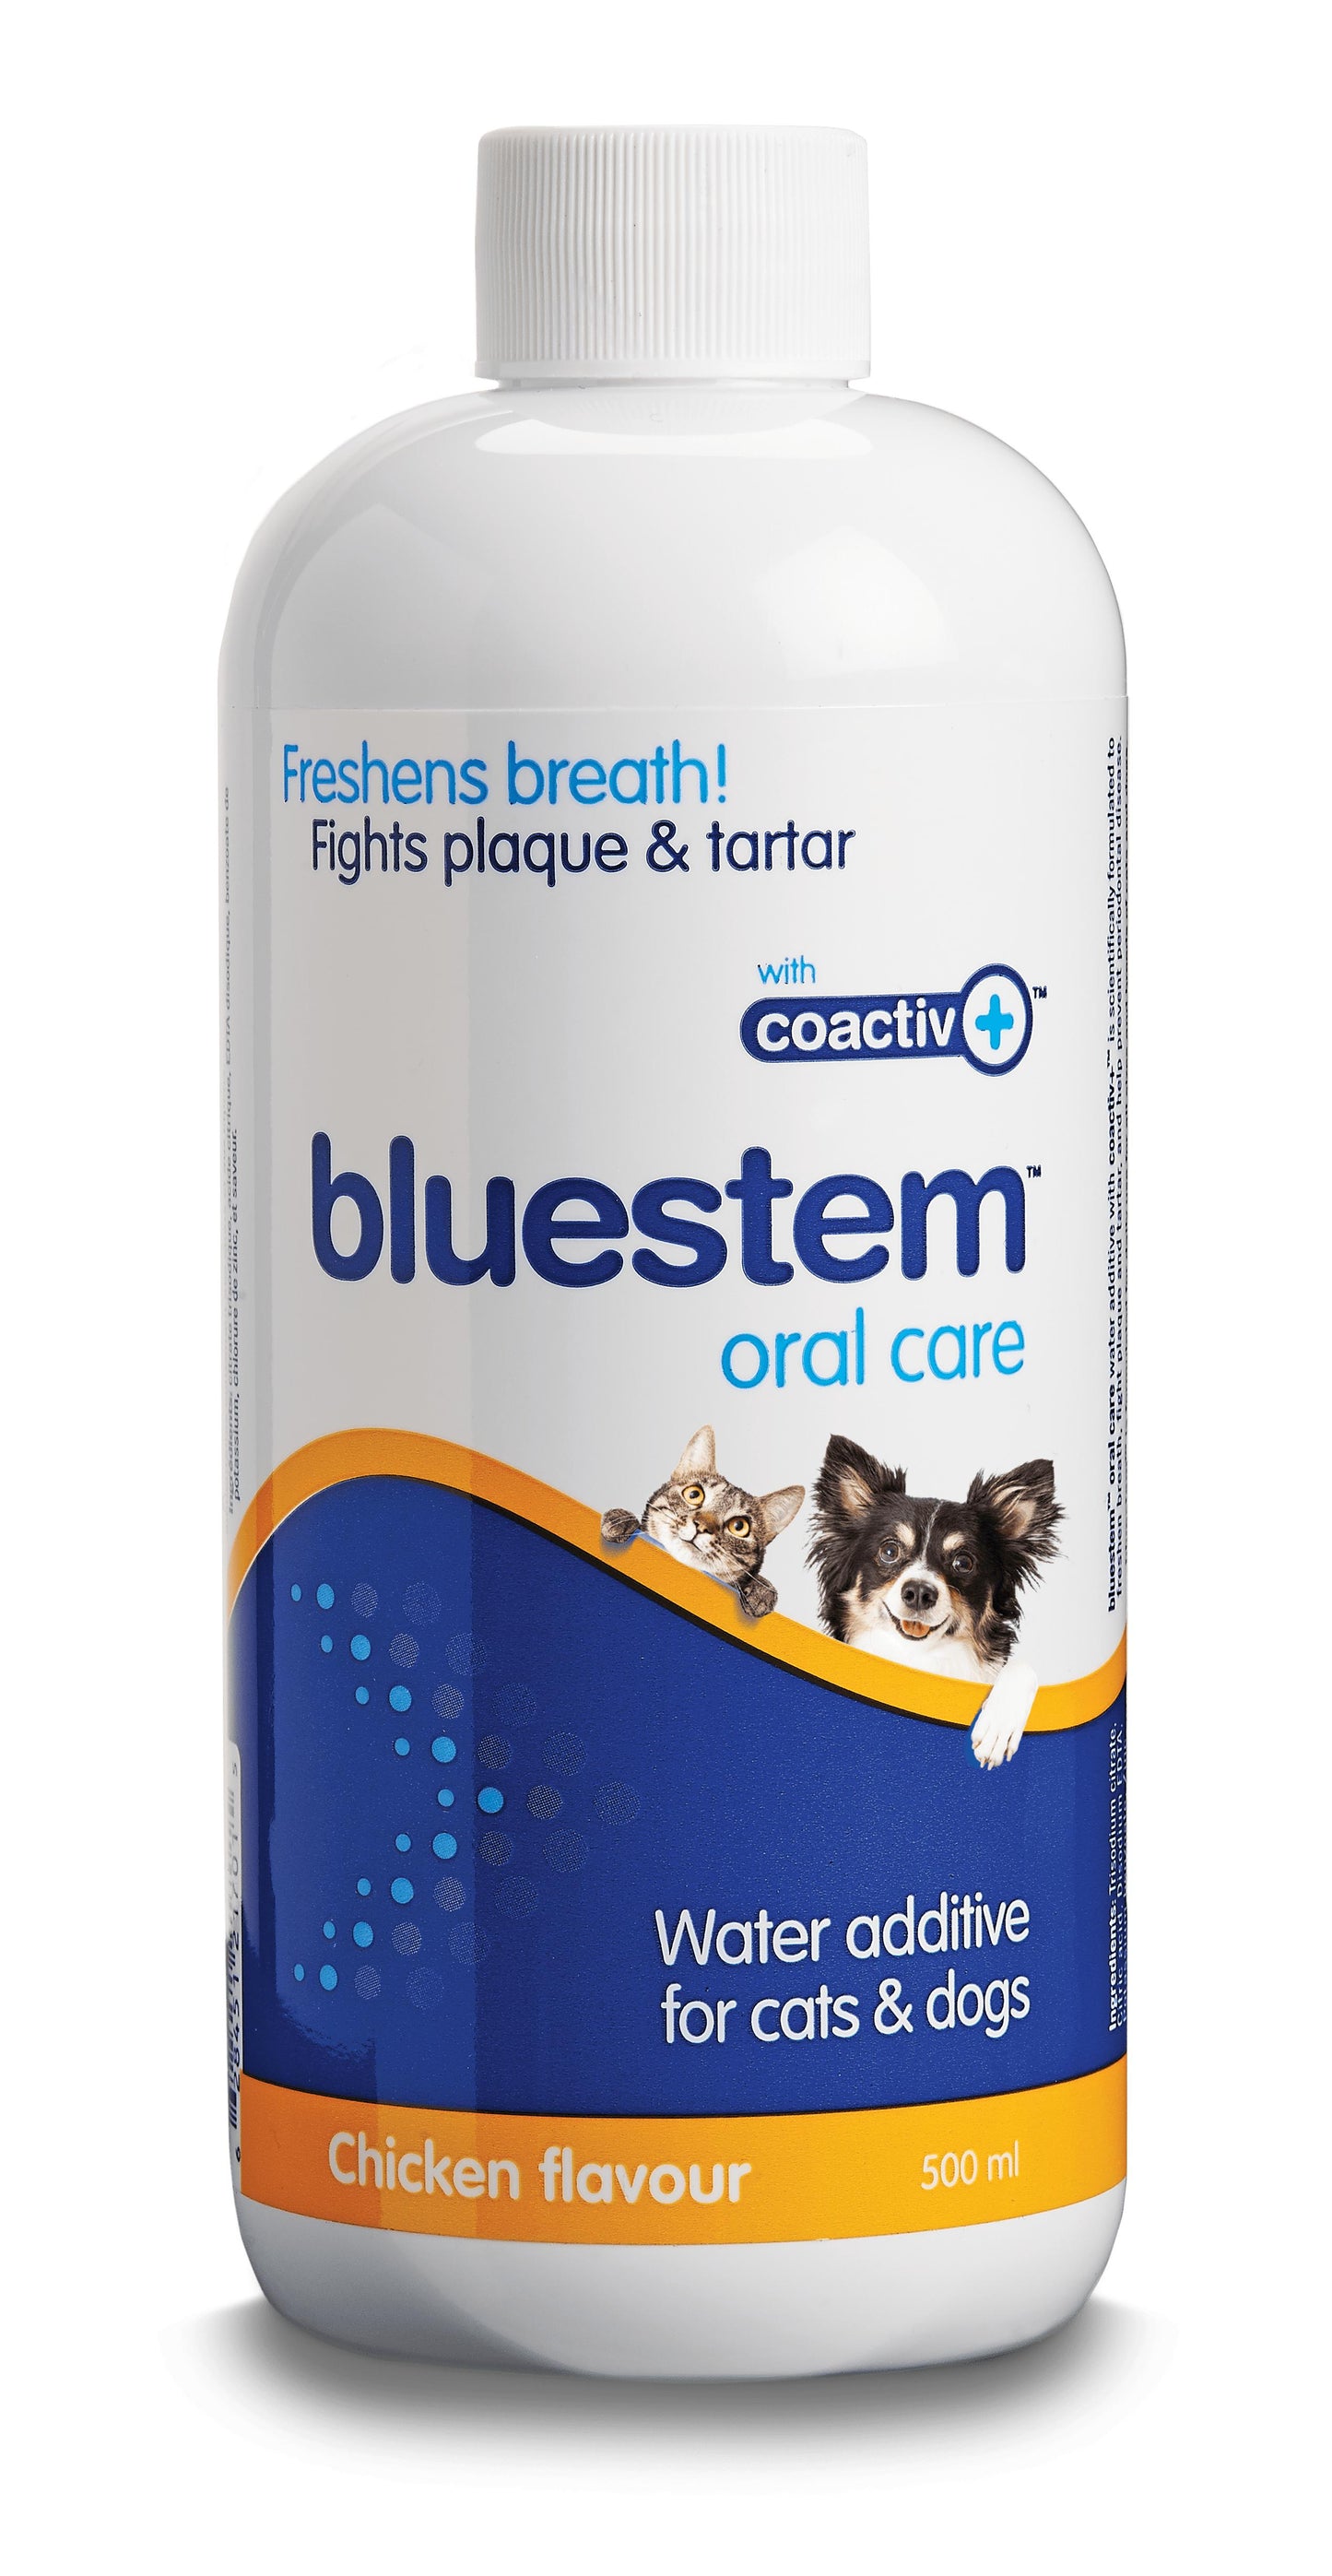 Bluestem Oral Care Water Additive for Dogs and Cats | 500 mL Bottle